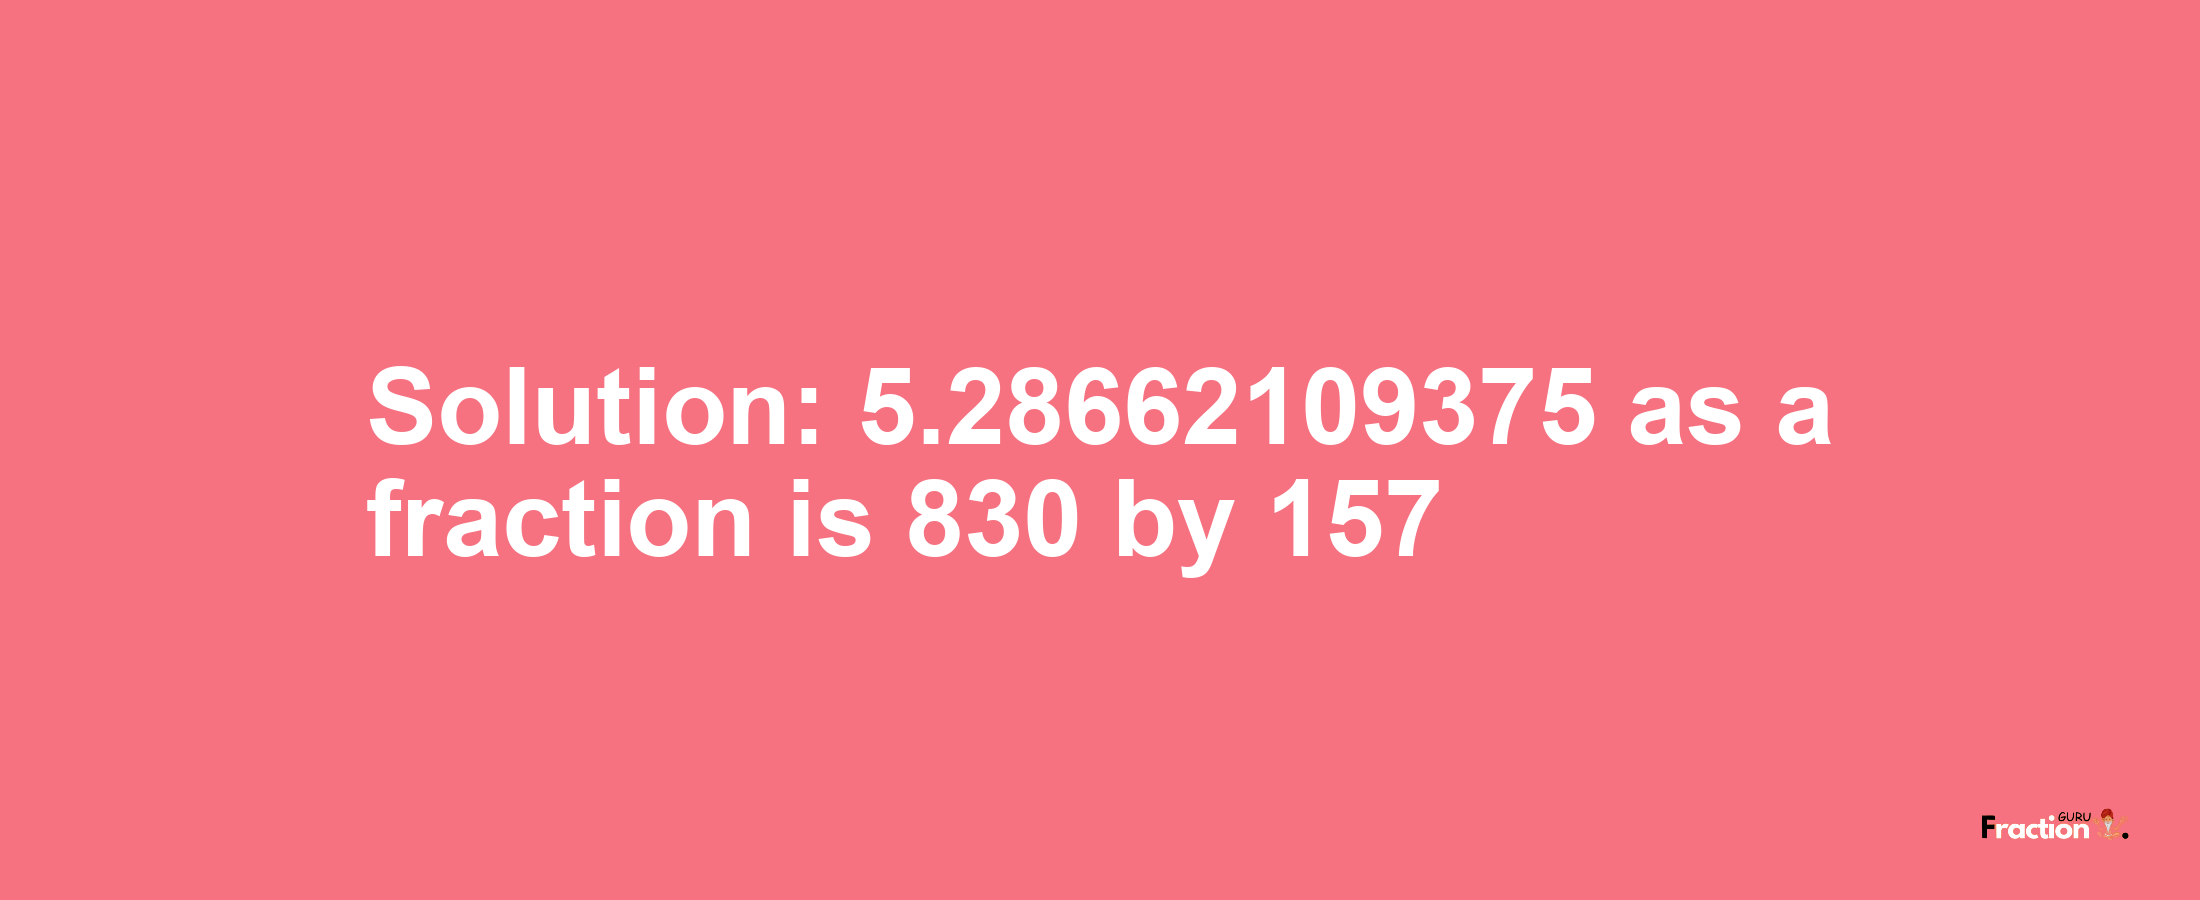 Solution:5.28662109375 as a fraction is 830/157